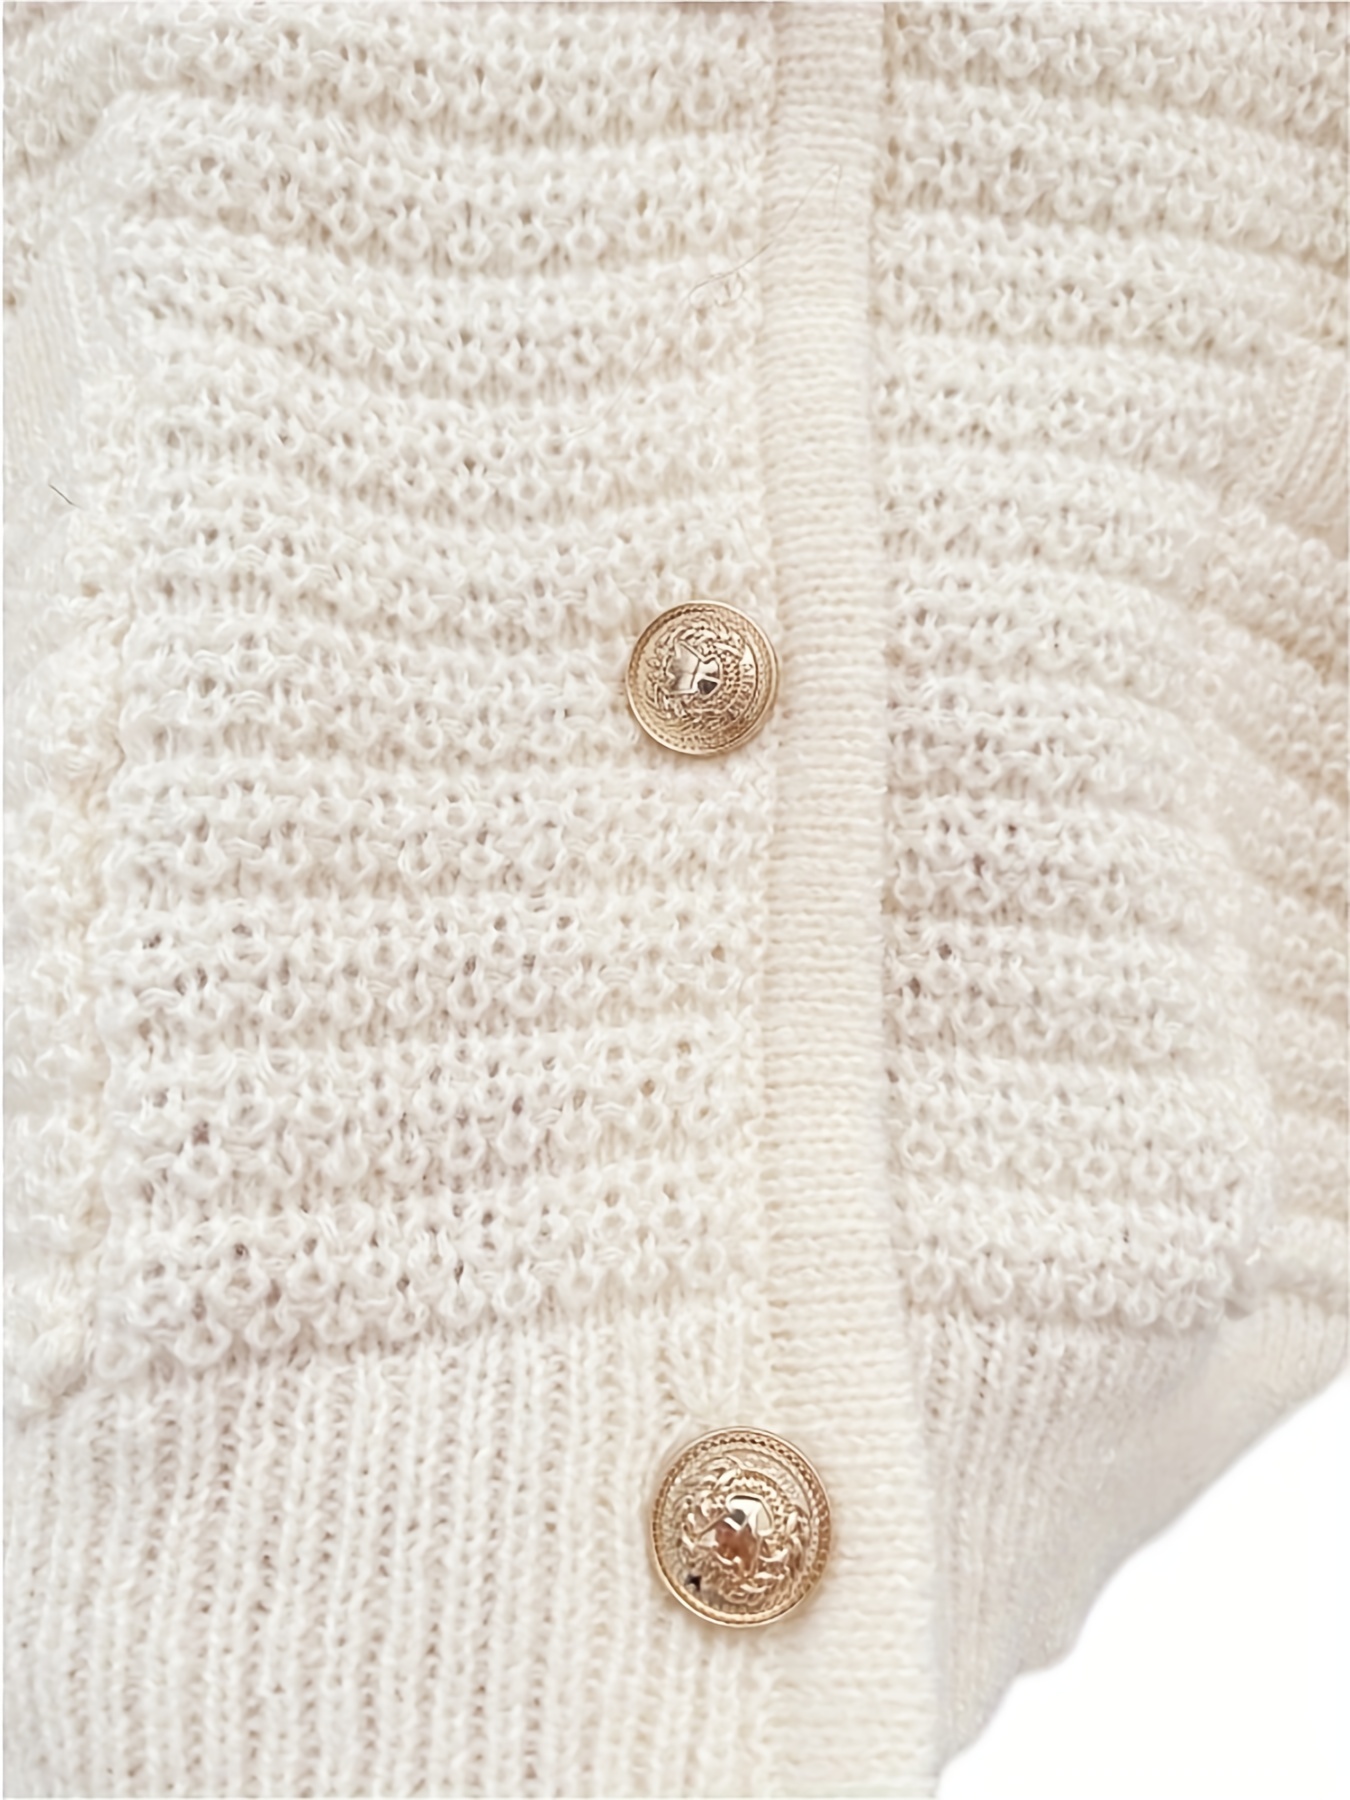 Sophisticated Ivory Cable Knit Oversized Cardigan Sweater